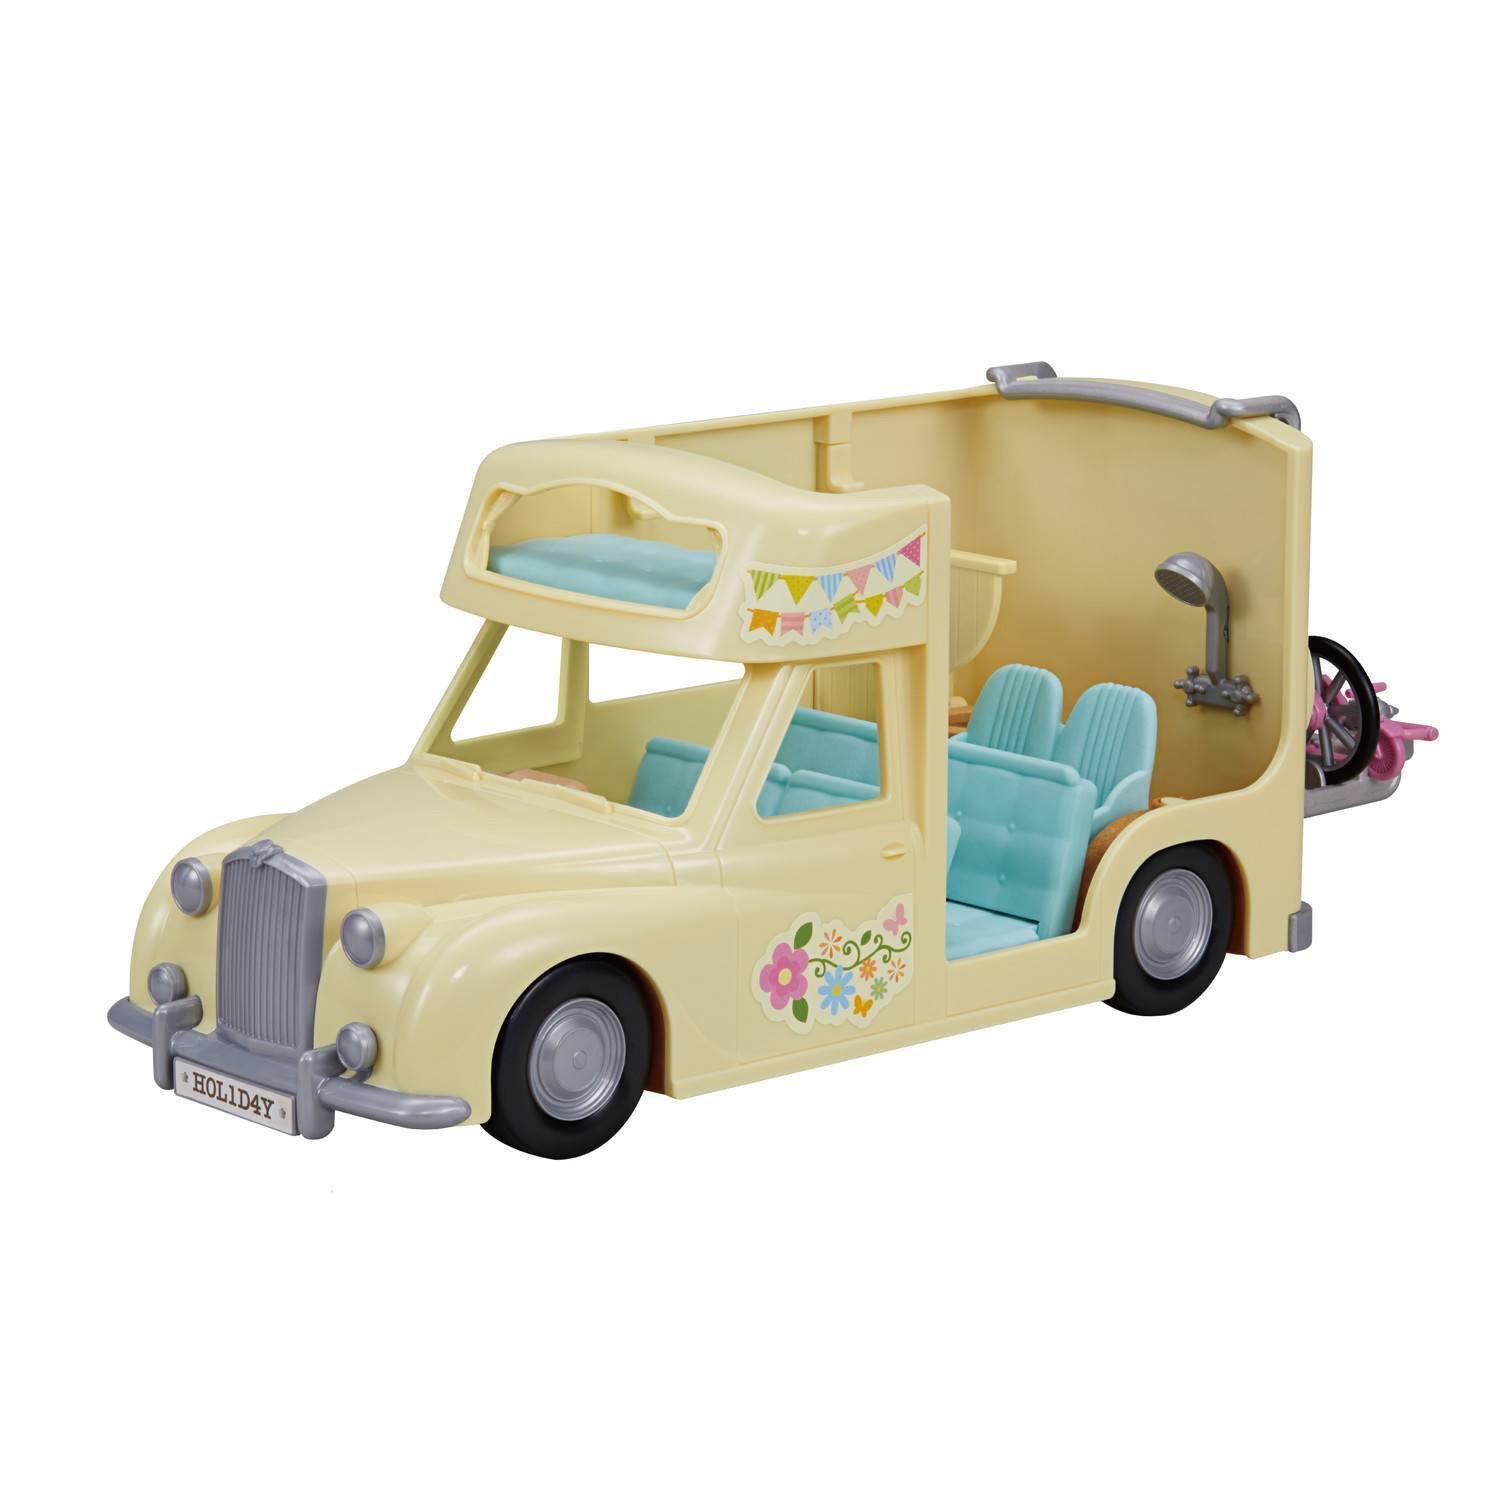 Calico Critters - Family Campervan